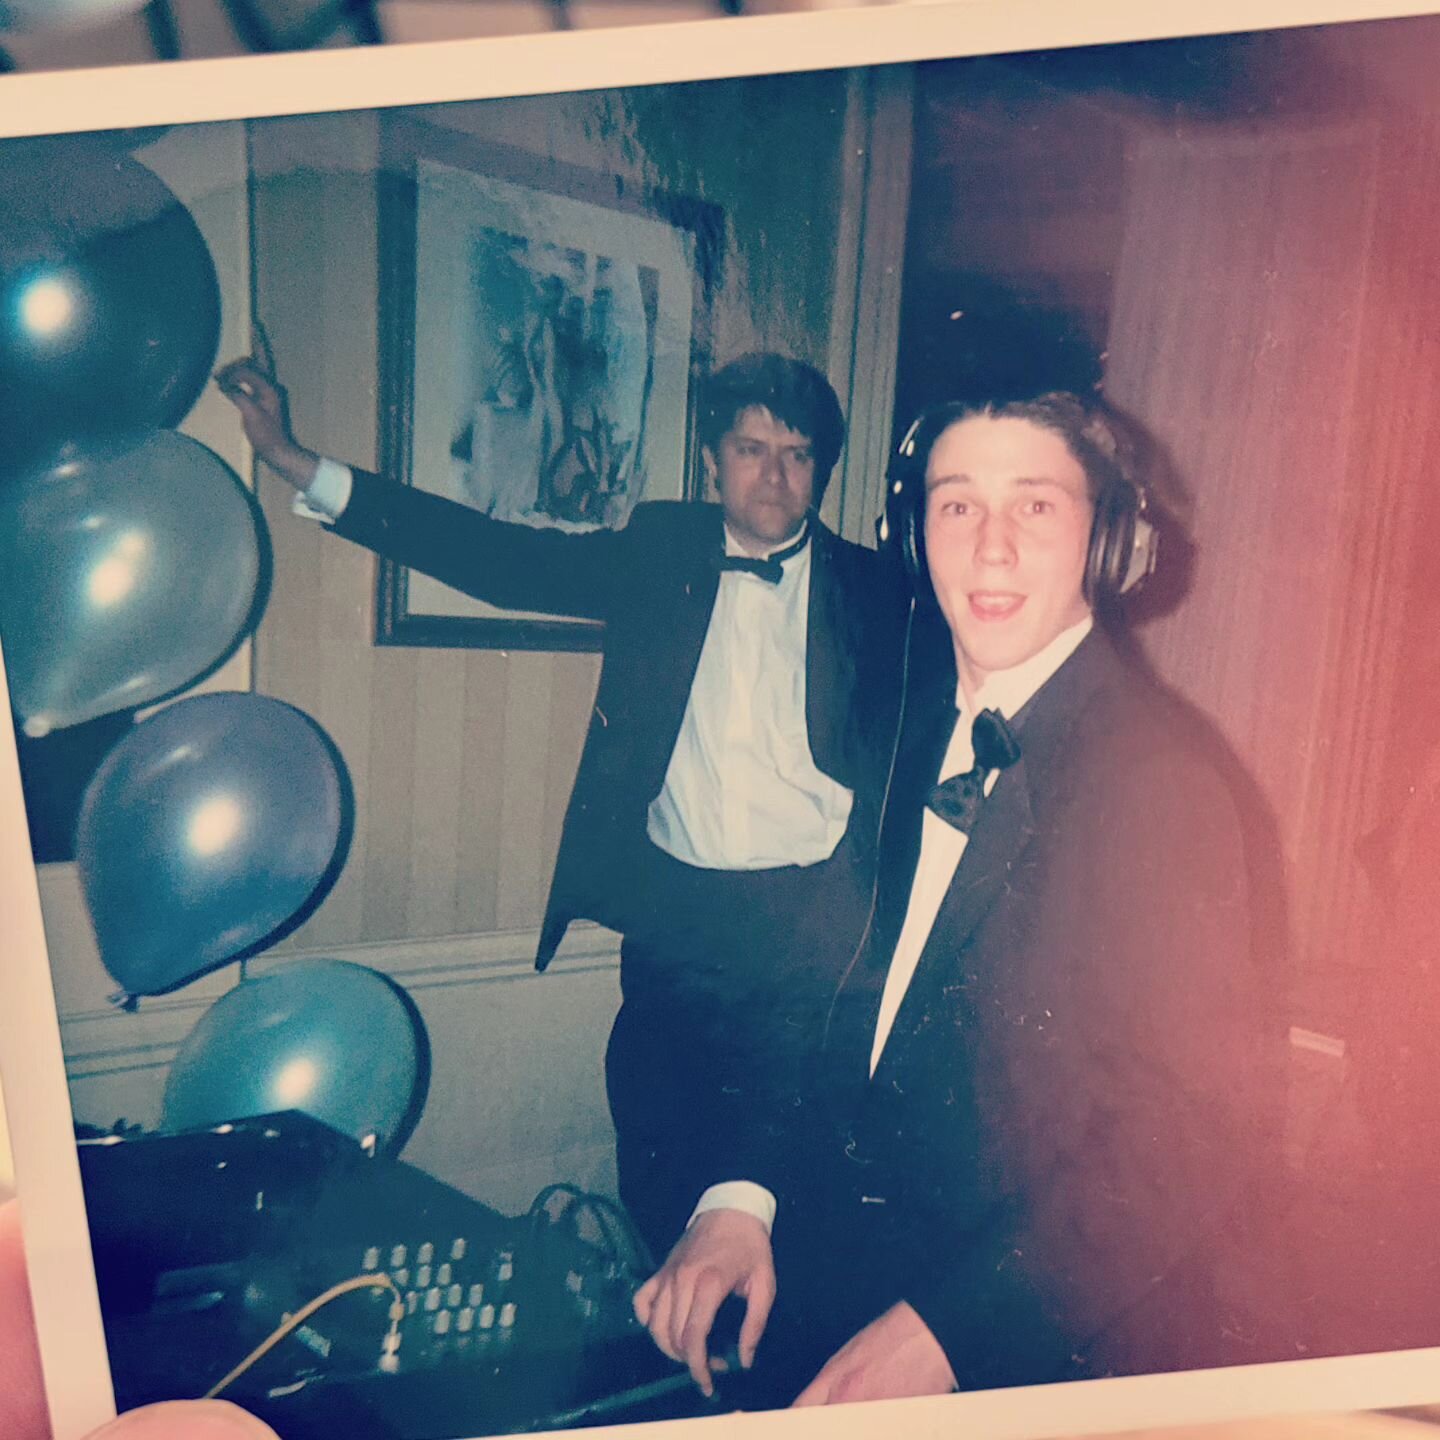 This is me. 20 years ago. DJing at my prom! 👀💿

F*** I feel old 👴

The undone clip on bowtie is a perfect summary of how classy a night it was 🤣 And my track list was spot on! 🕺

Here's to all the cool kids out at prom tonight. 🍻🙌🕺🎉😎